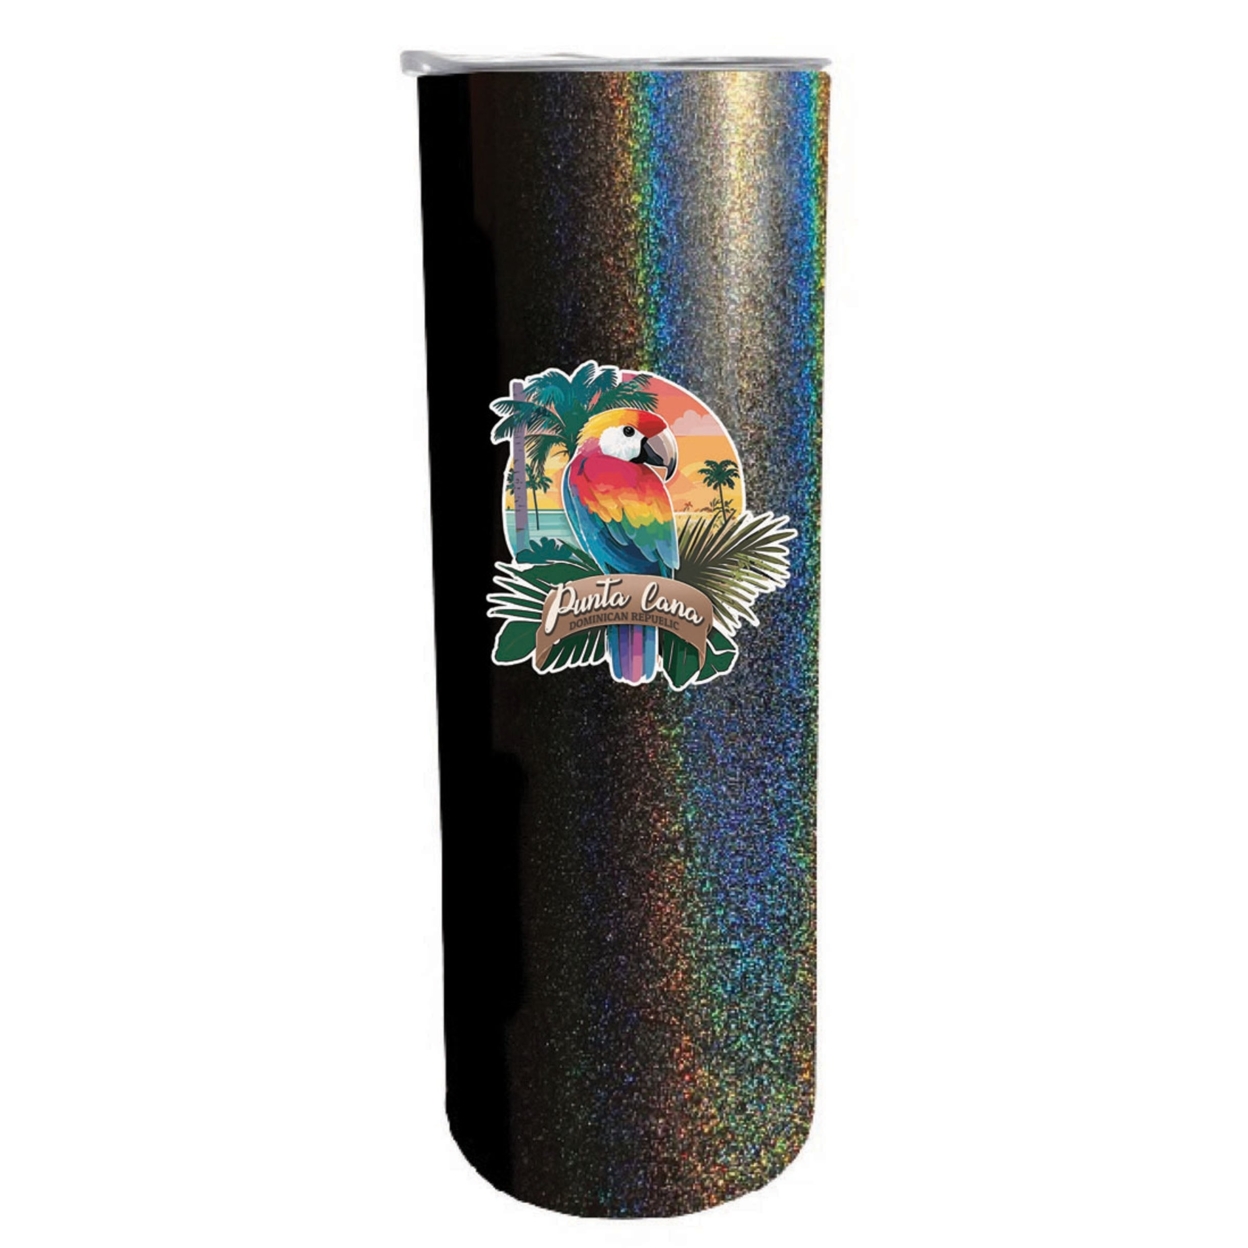 Punta Cana Dominican Republic Souvenir 20 Oz Insulated Stainless Steel Skinny Tumbler - Rainbow Glitter Black, PARROT